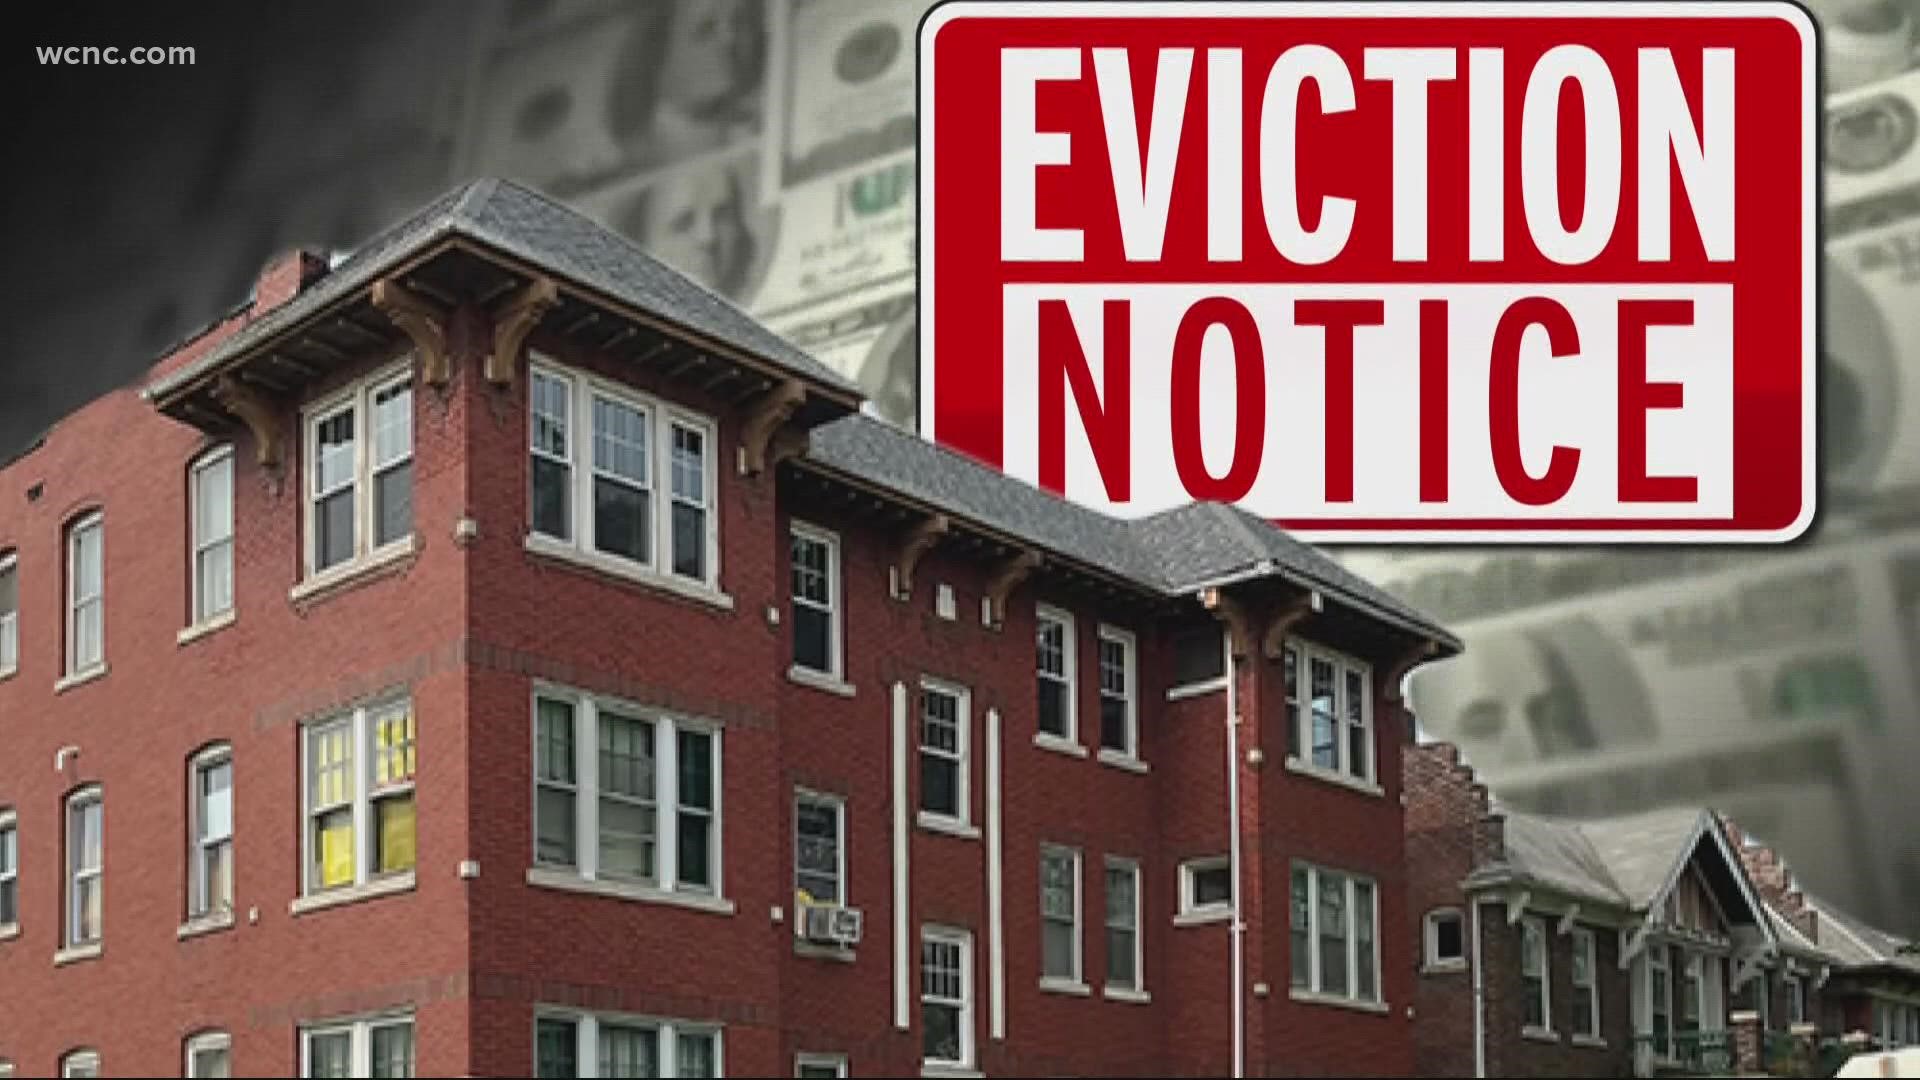 The CDC issued on Tuesday, Aug. 3 a new moratorium on evictions that would last until Oct. 3.